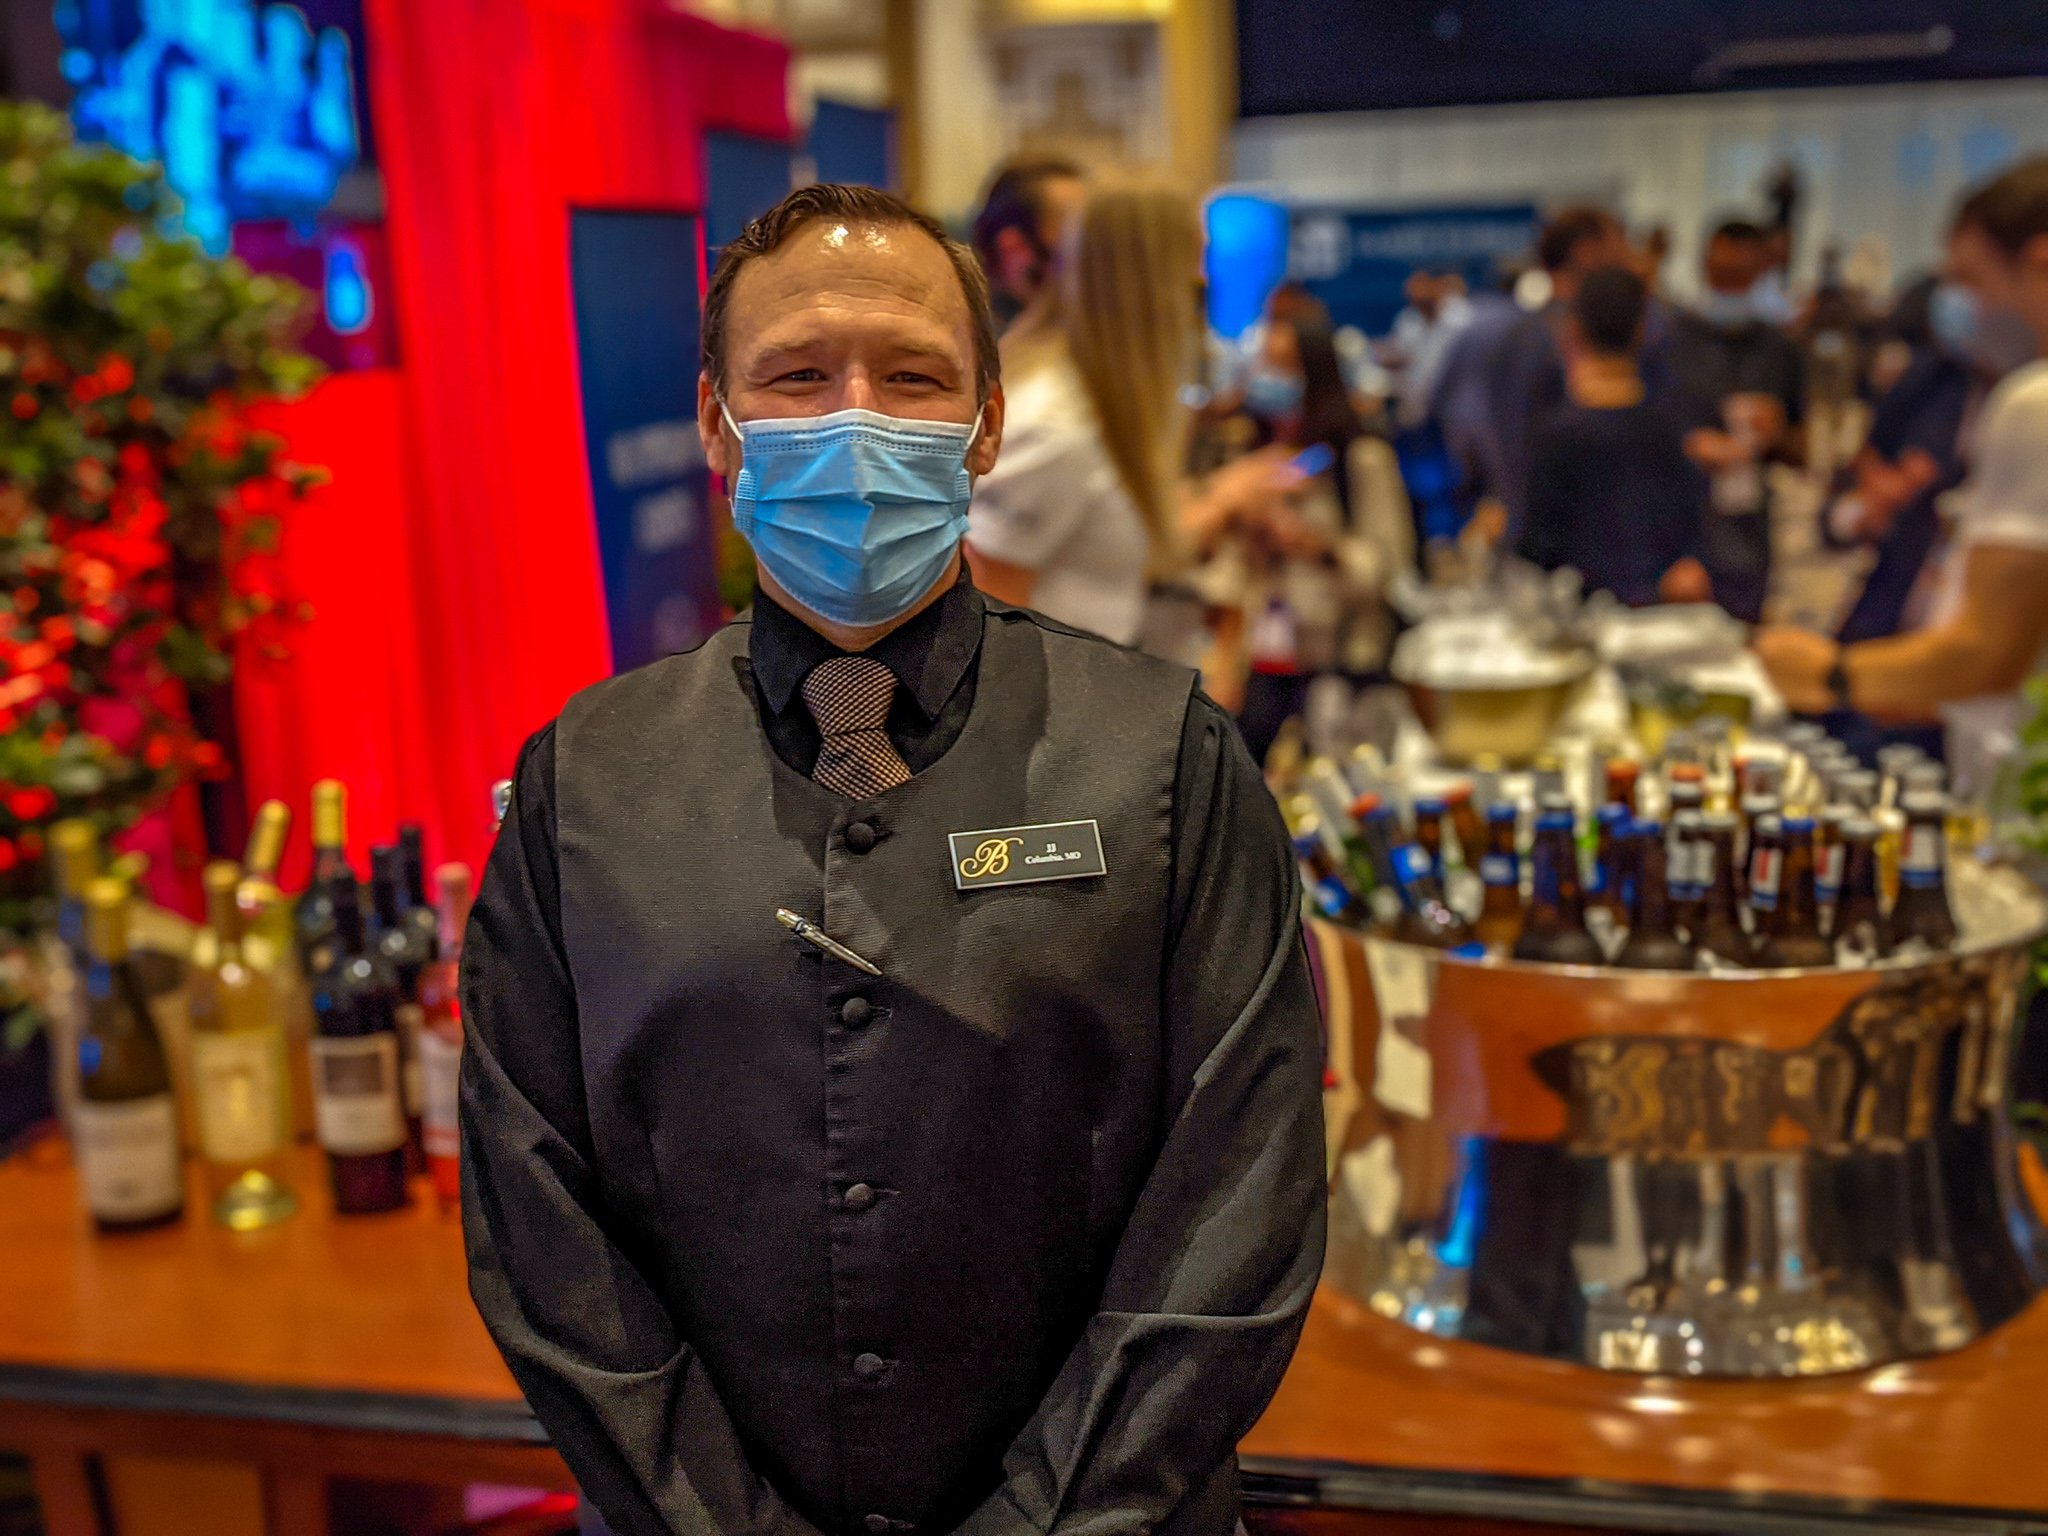 A man wearing a nametag that says "JJ" stands in front of a bar.